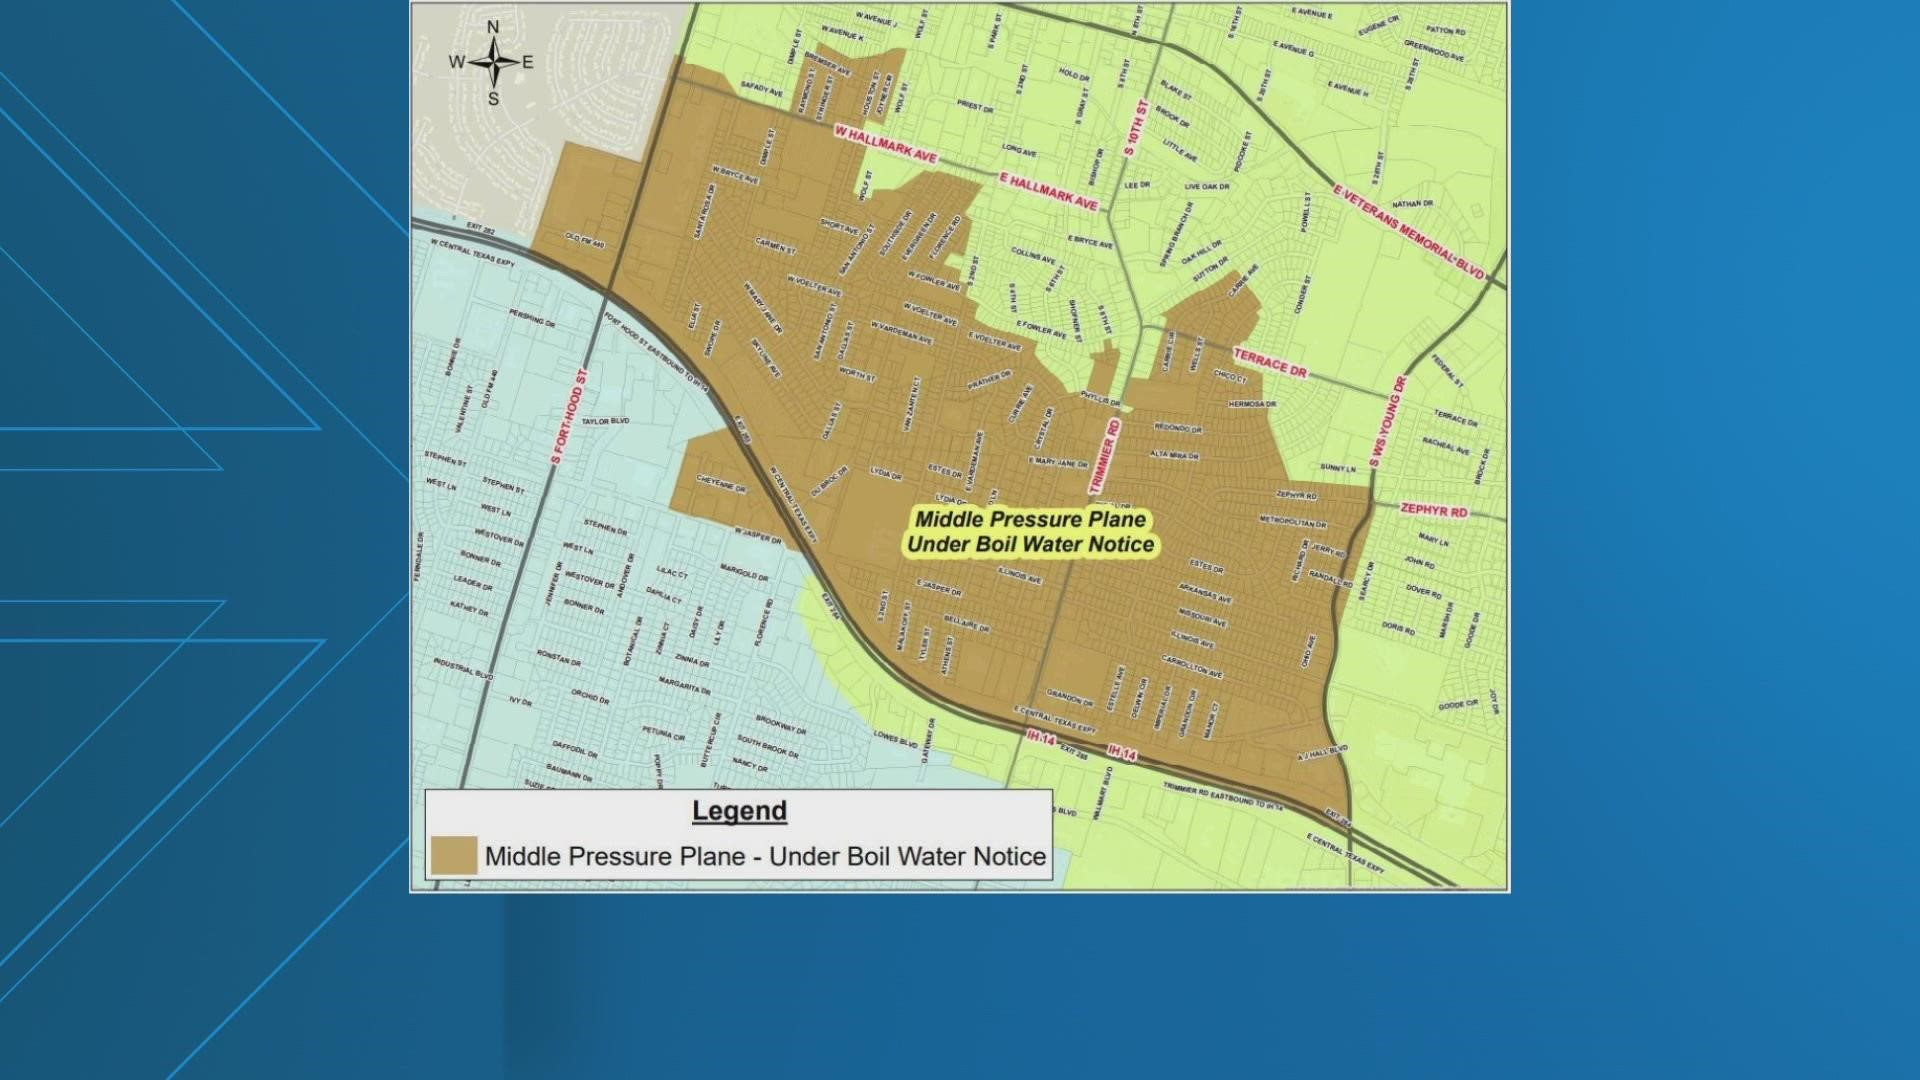 Over 3,000 customers are being affected after a private contractor hit a major water line.